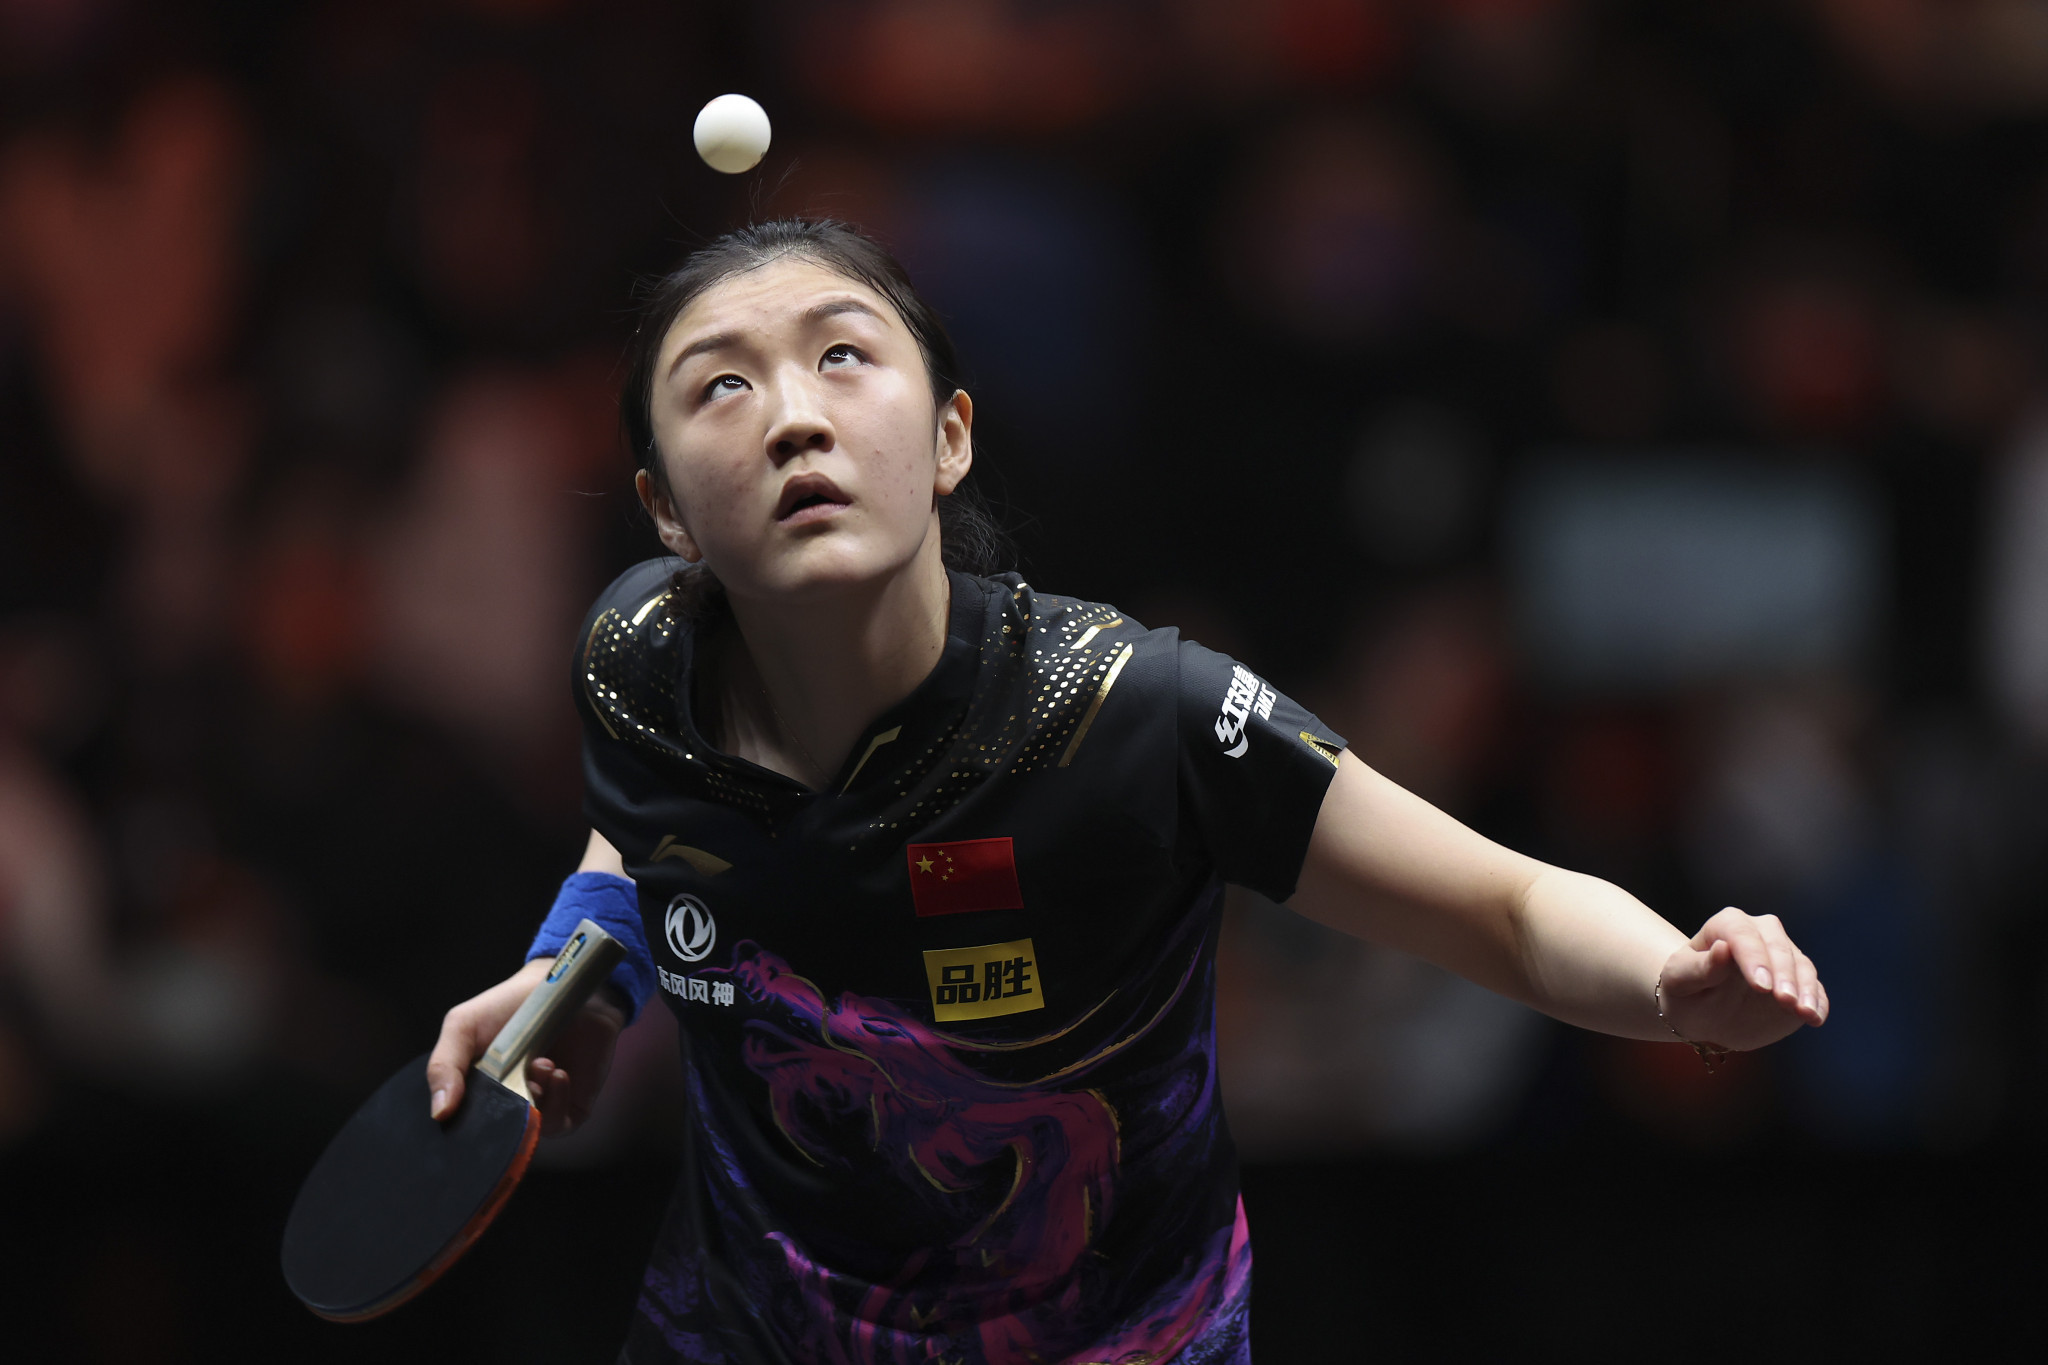 China put forward three athletes into WTT Cup Finals deciders in Xinxiang